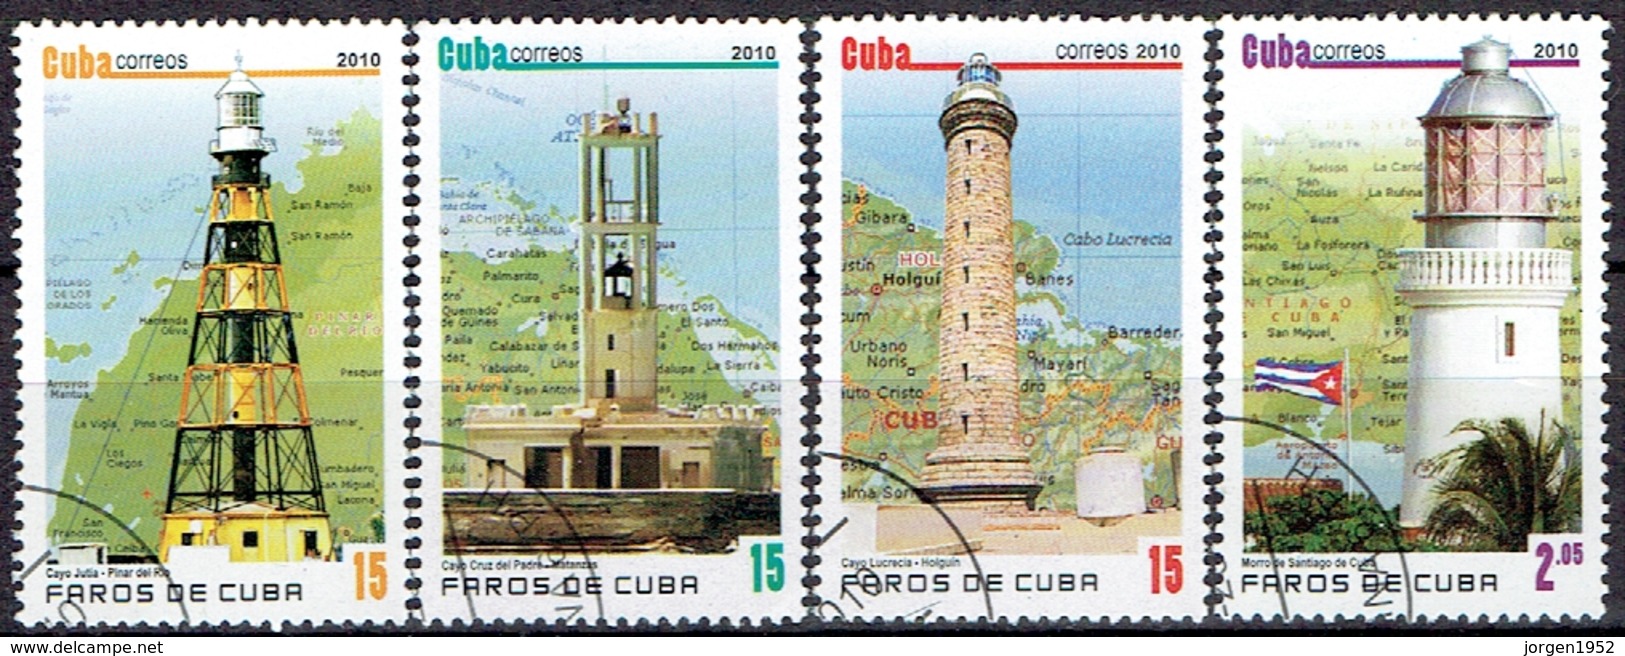 CUBA # FROM 2010 STAMPWORLD 5456-59 - Used Stamps